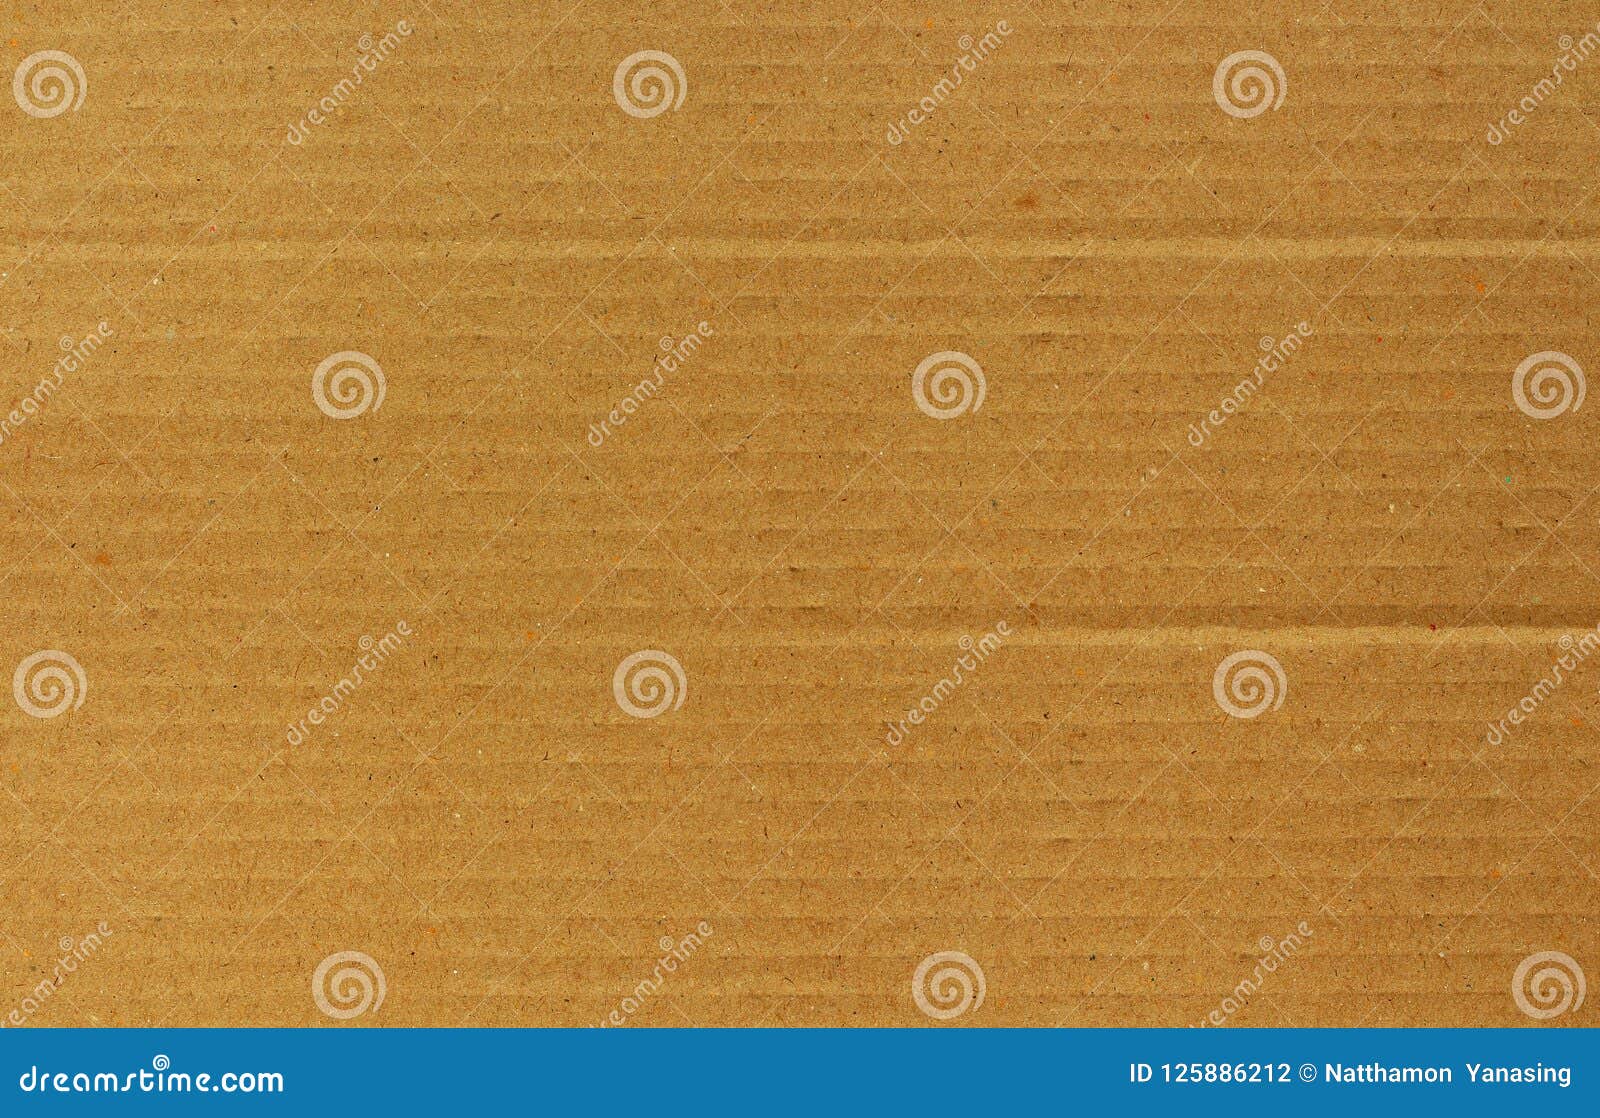 Cardboard sheet abstract background, texture of brown paper box for design art work, old vintage paper for background.